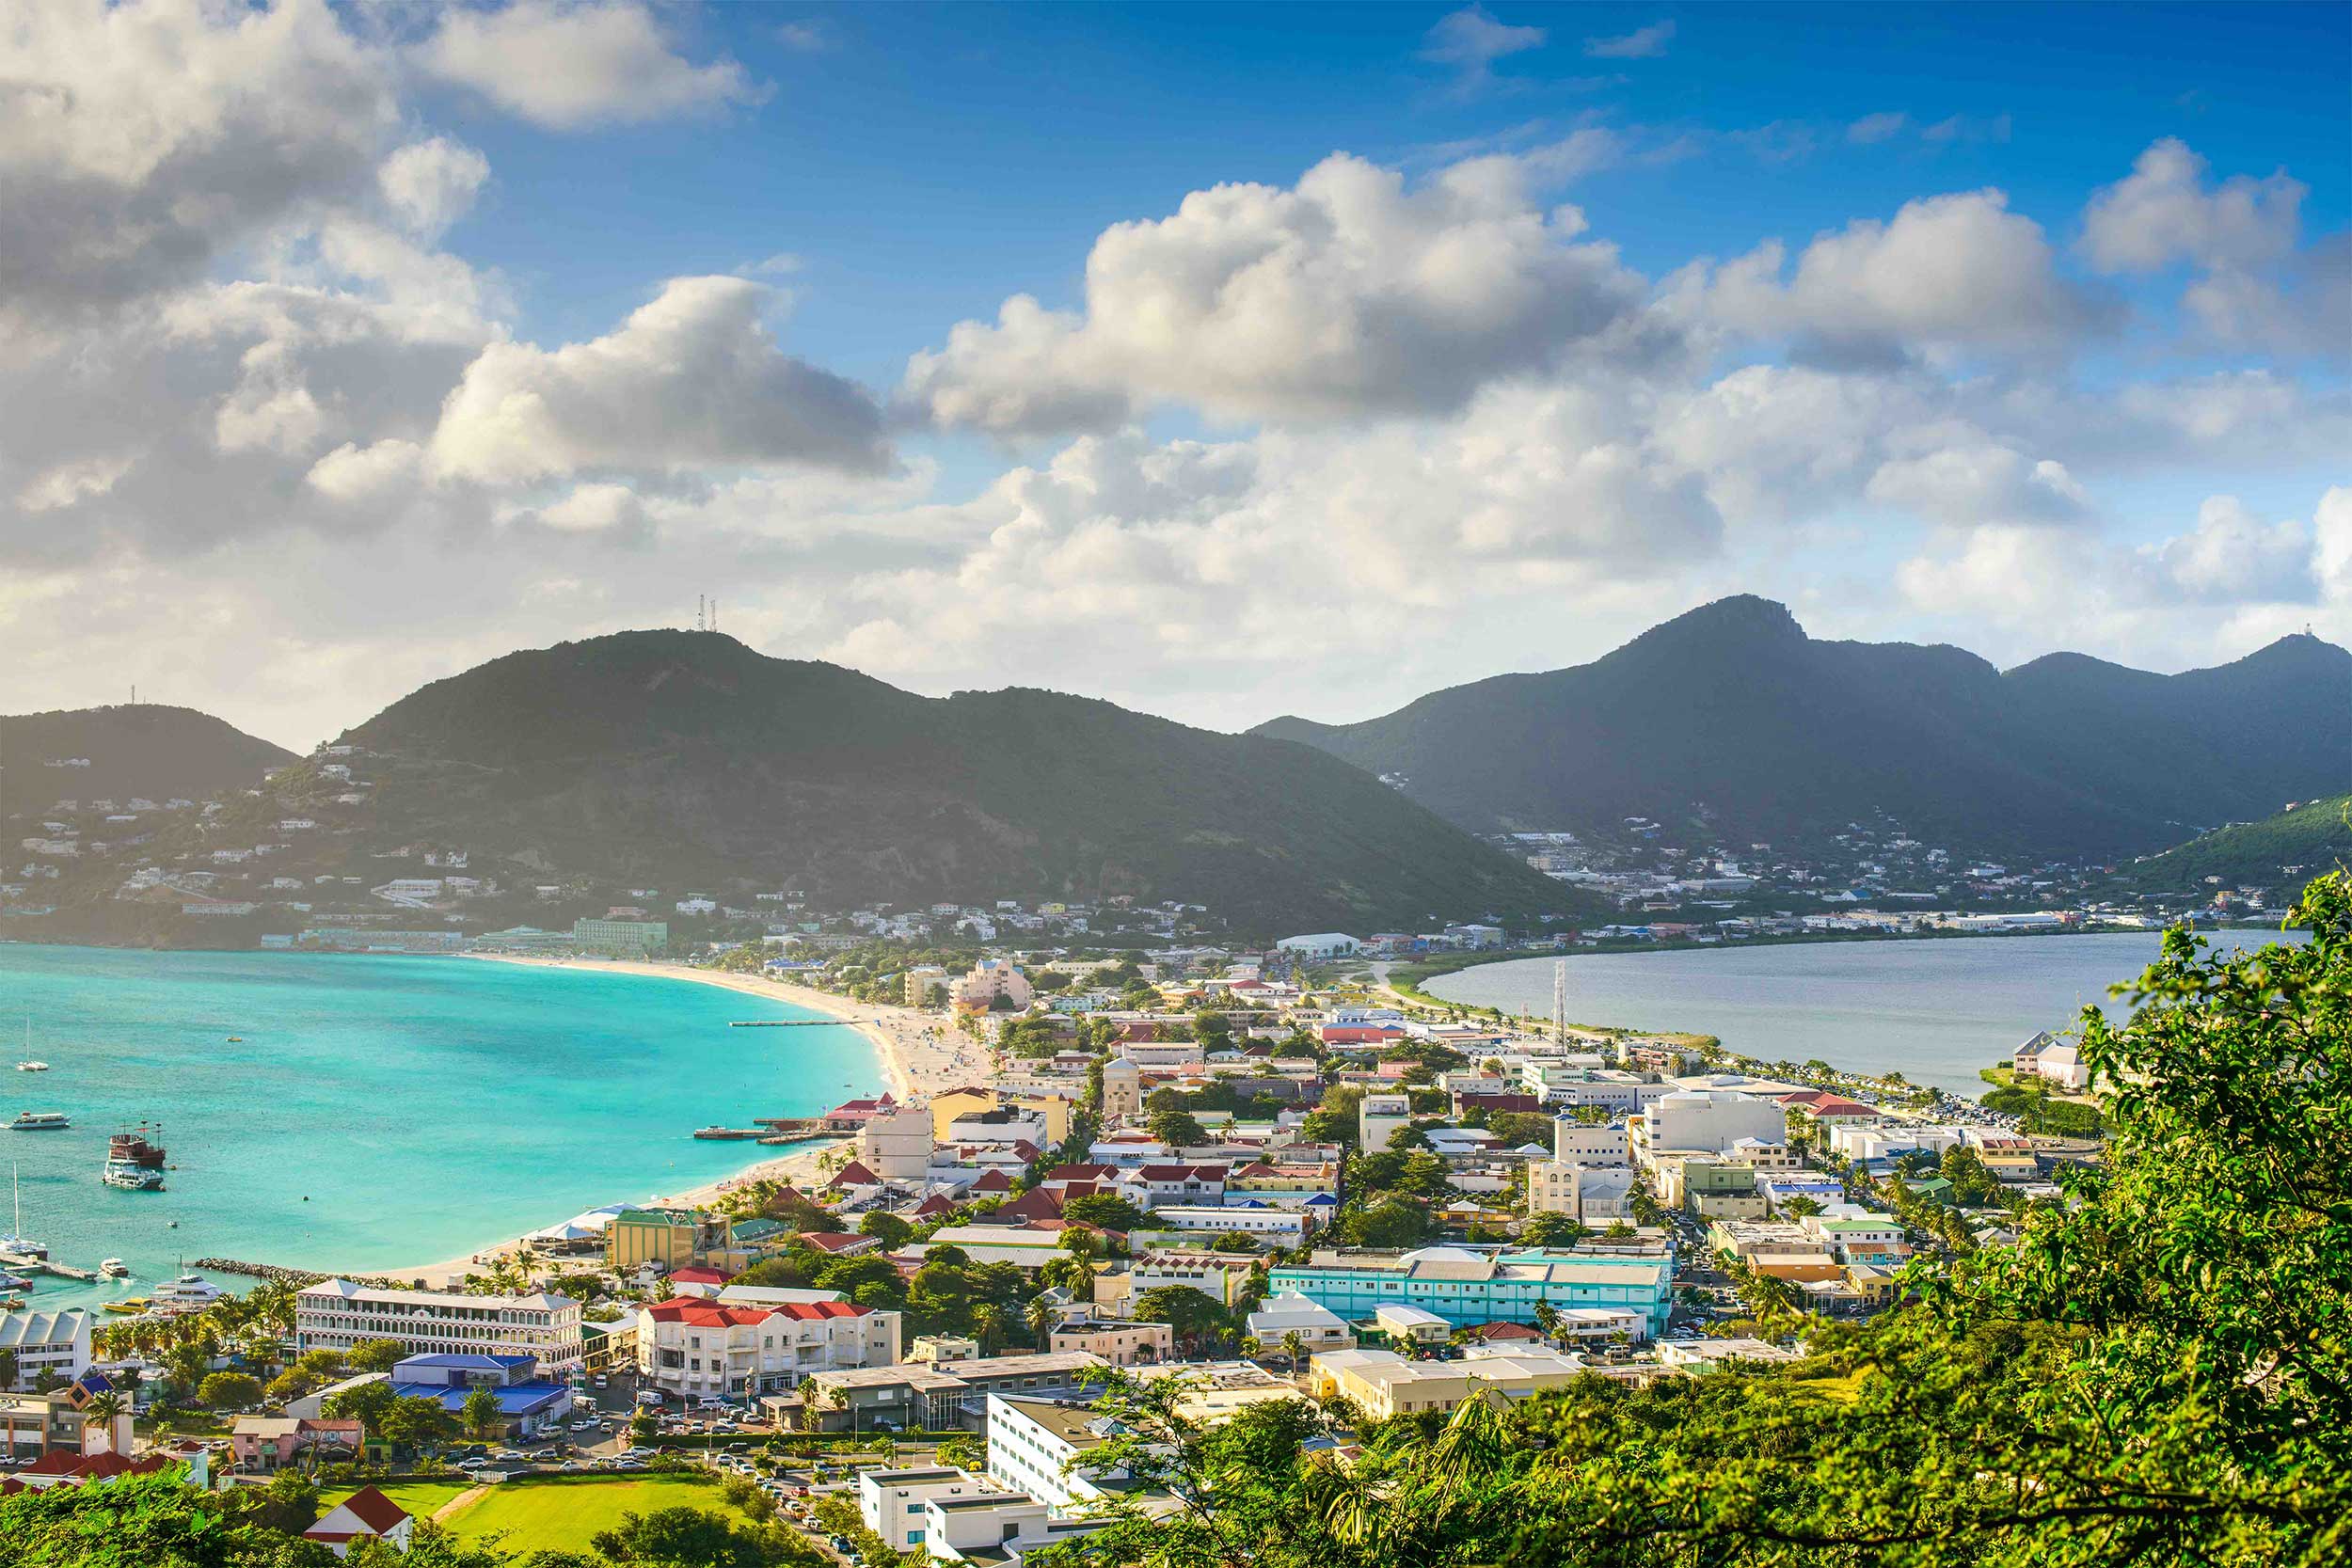 Aerial view of St. Maarten Island in the Caribbean.